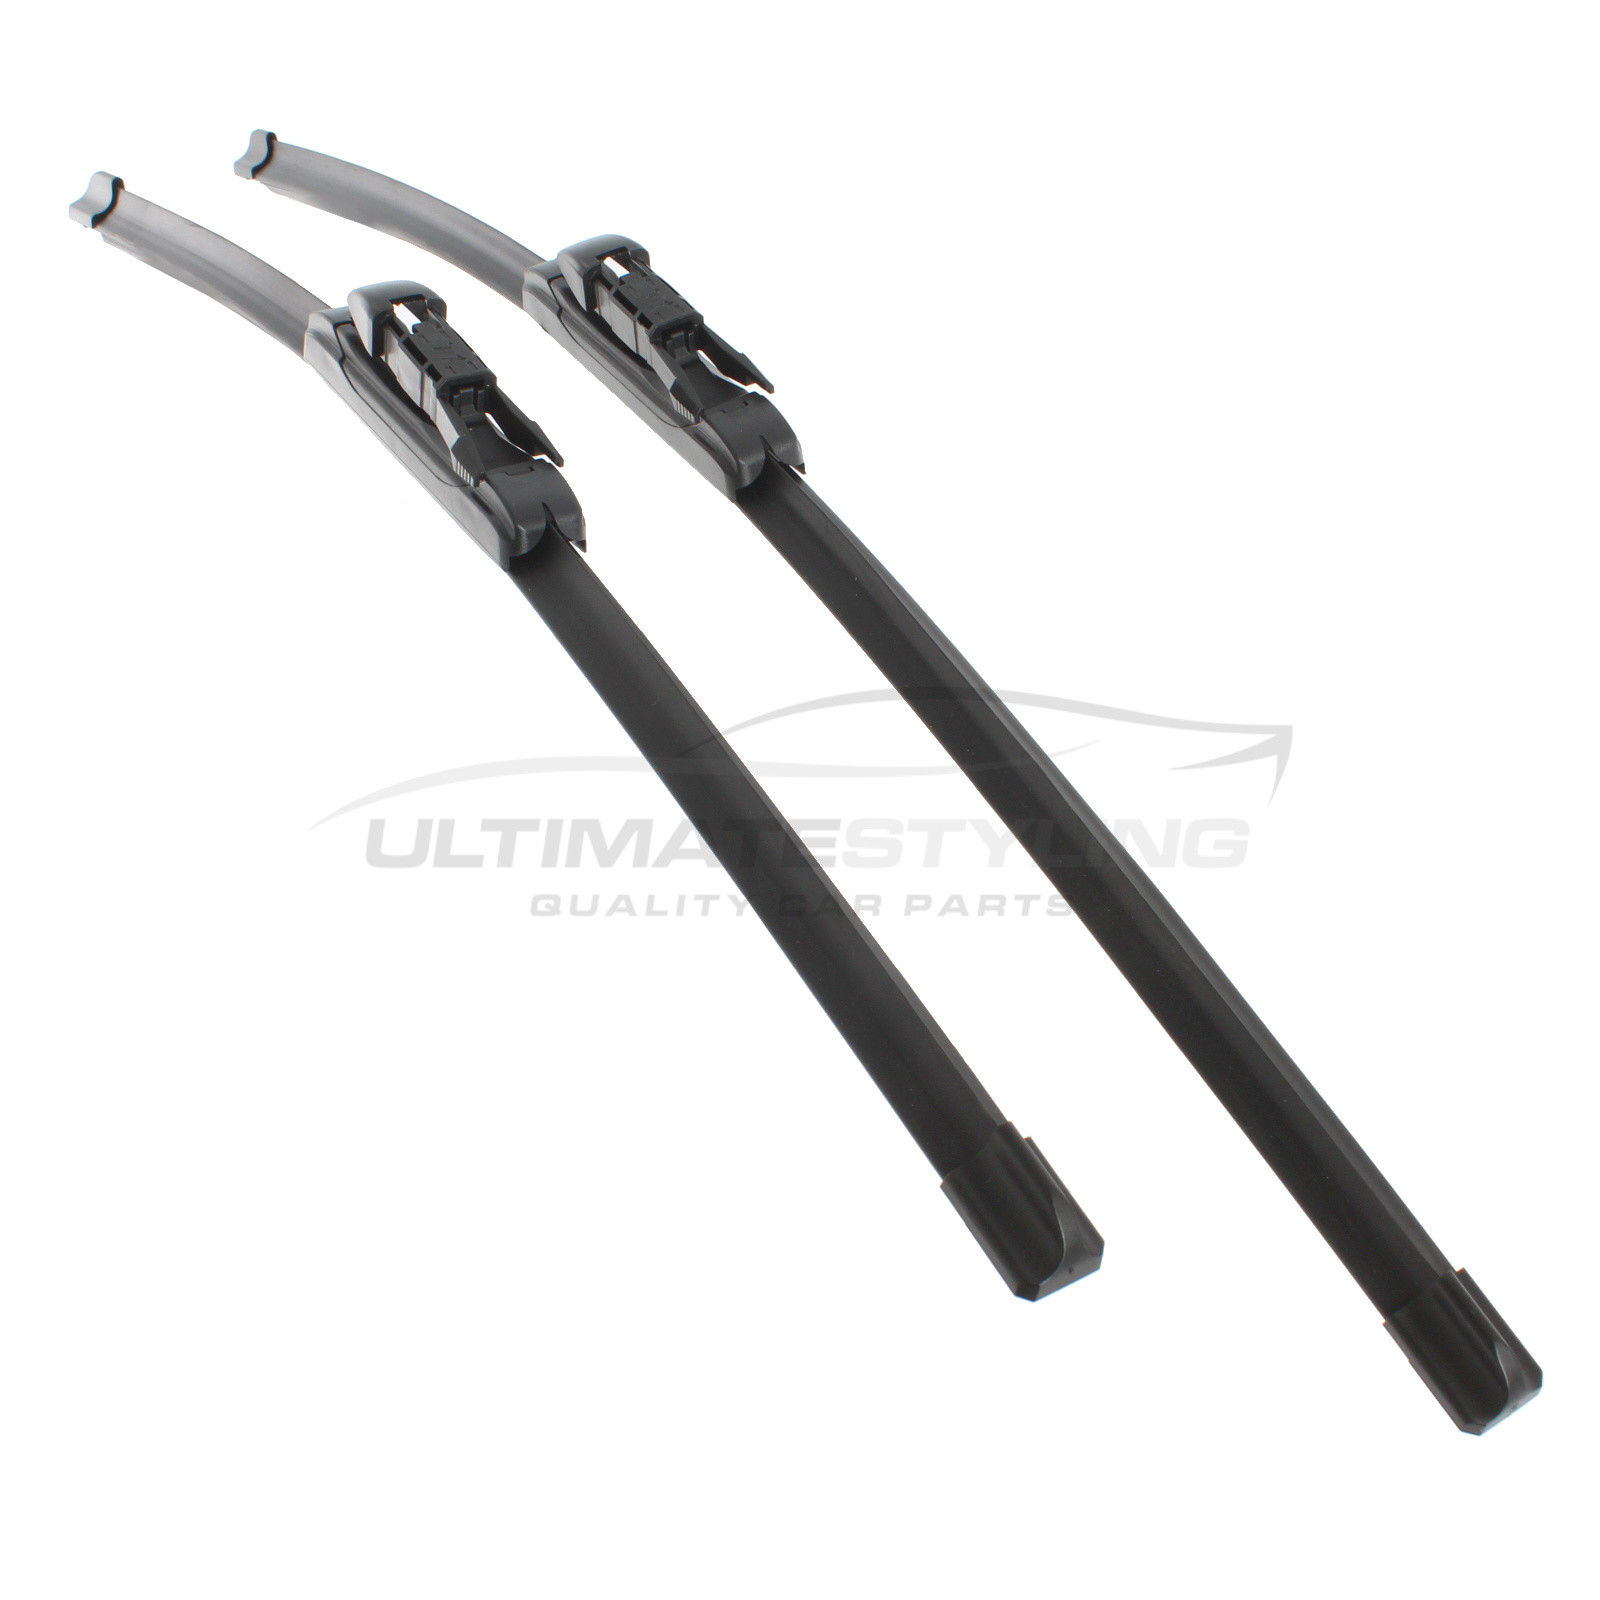 Drivers Side & Passenger Side (Front) Wiper Blades for Mercedes Benz GLA Class